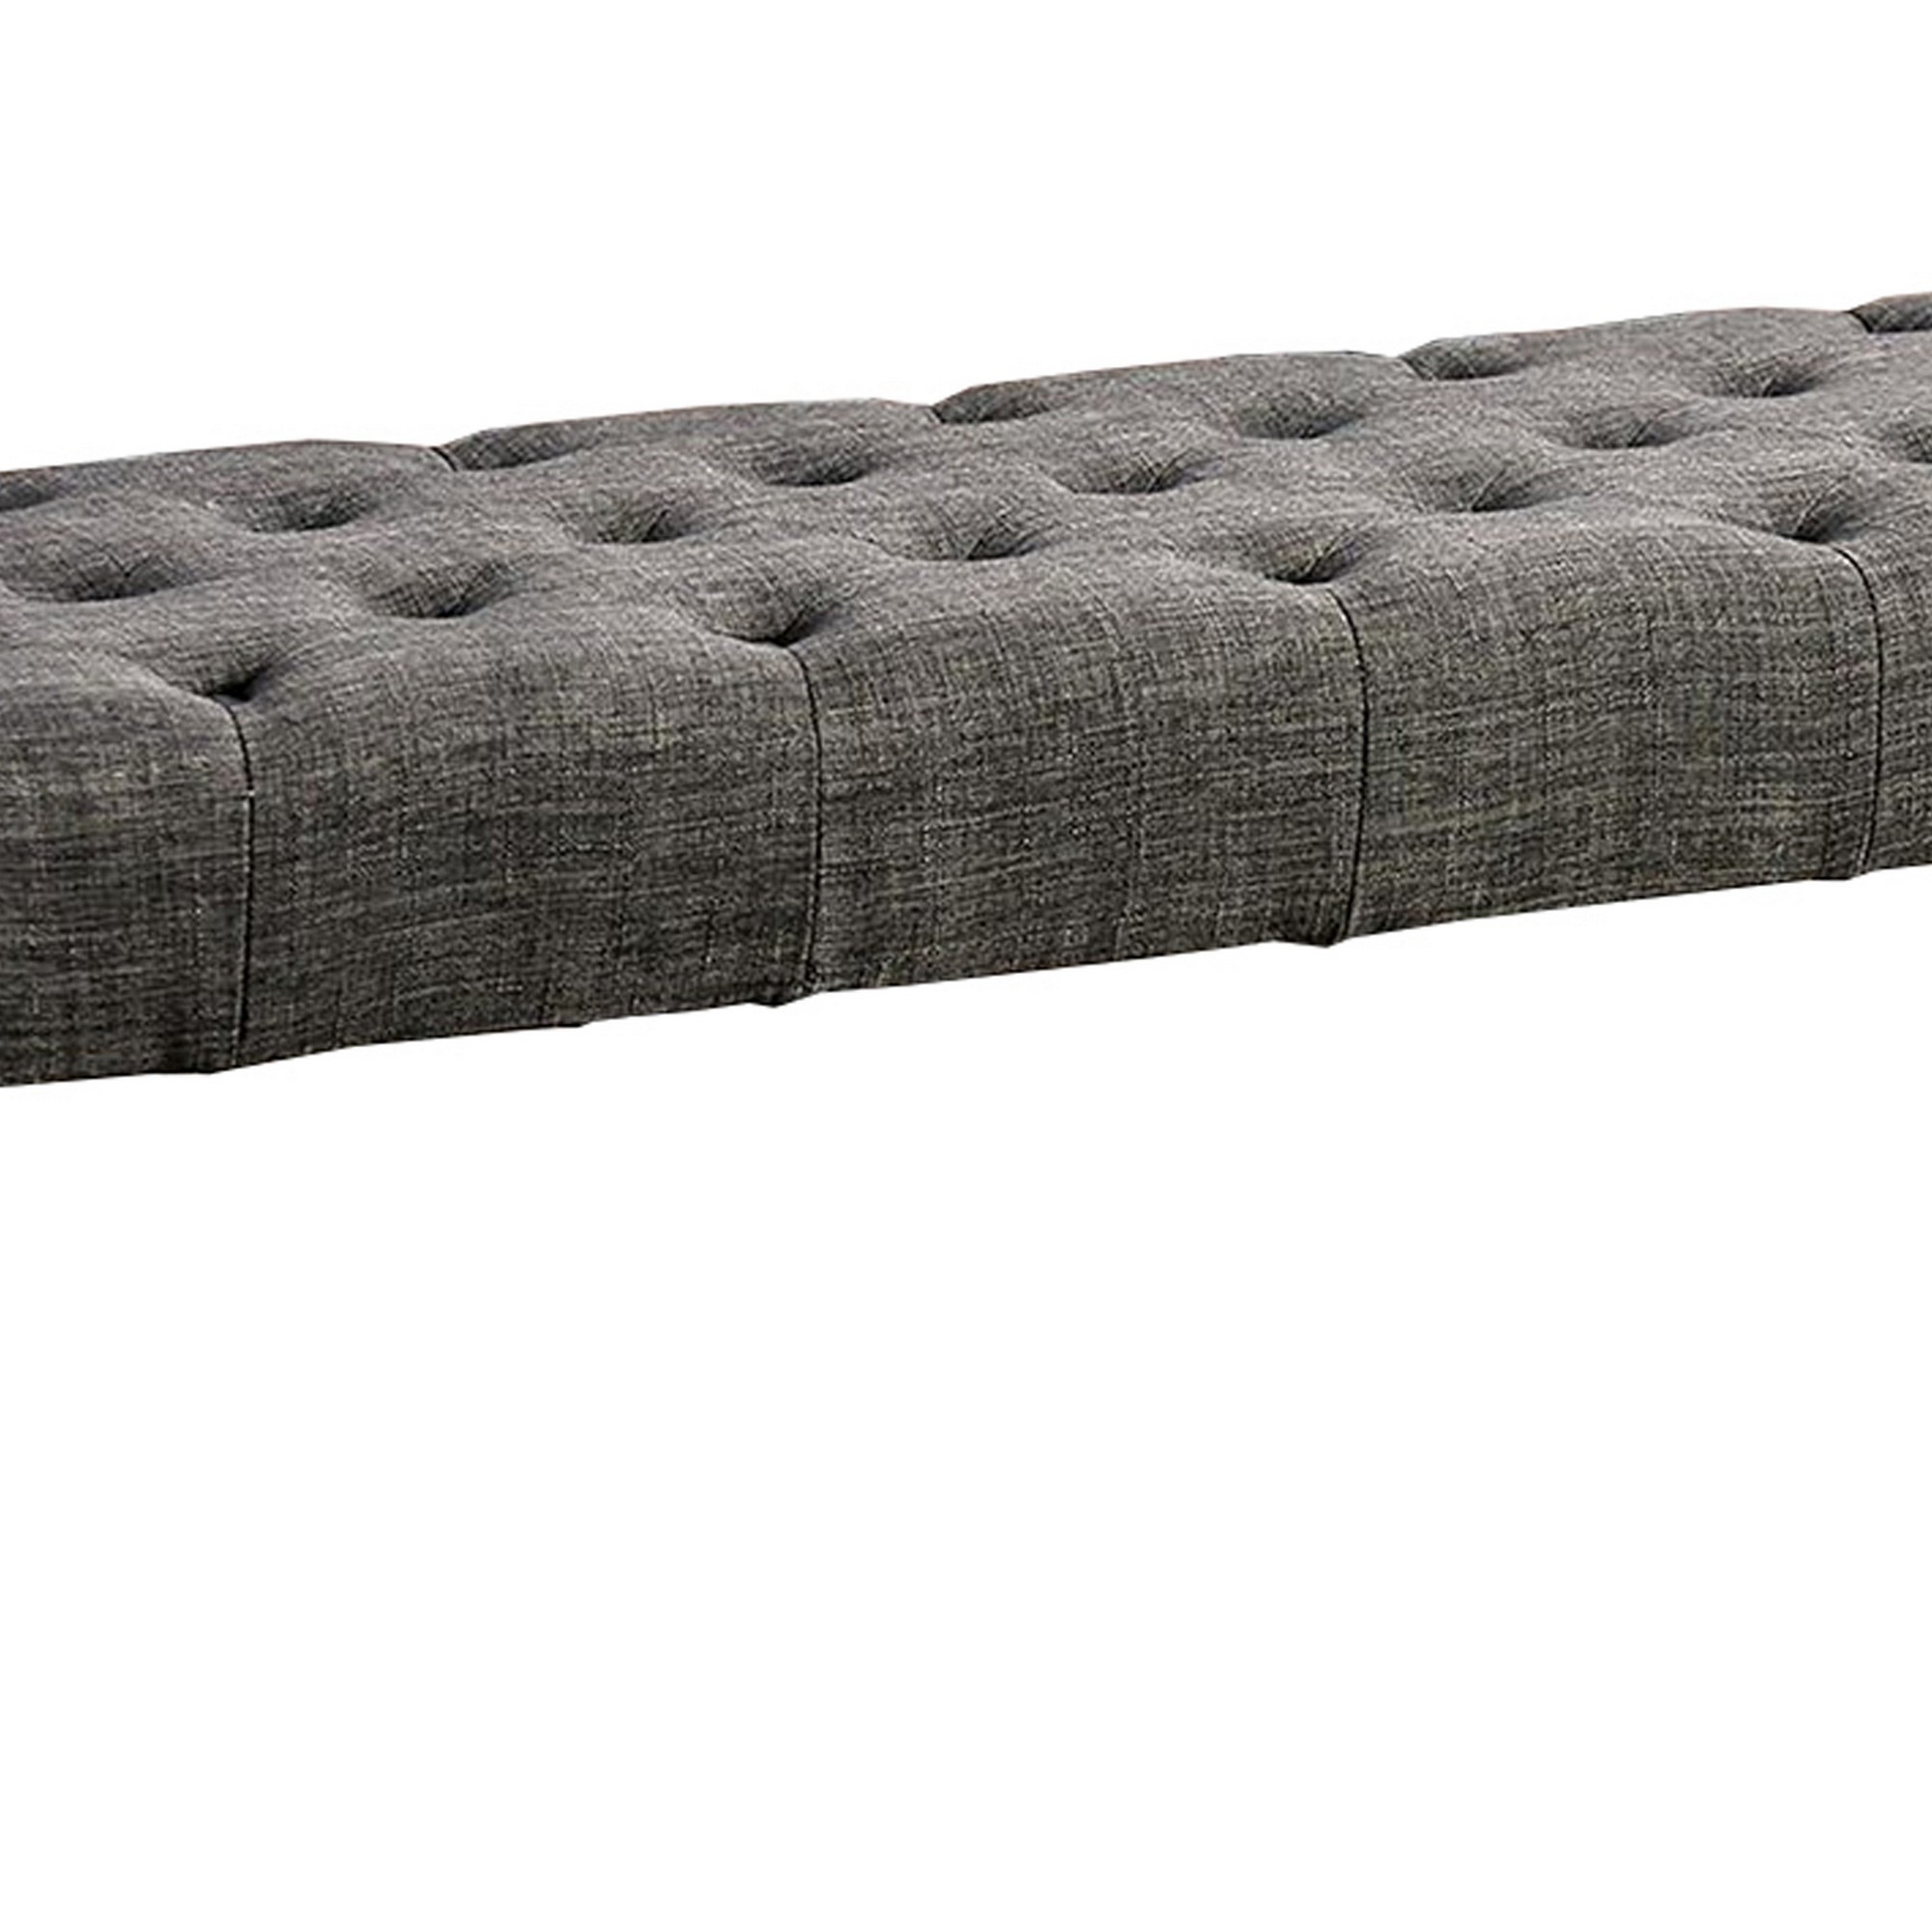 48 Inches Bench With Button Tufted Seat And Chamfered Legs, Gray- Saltoro Sherpi